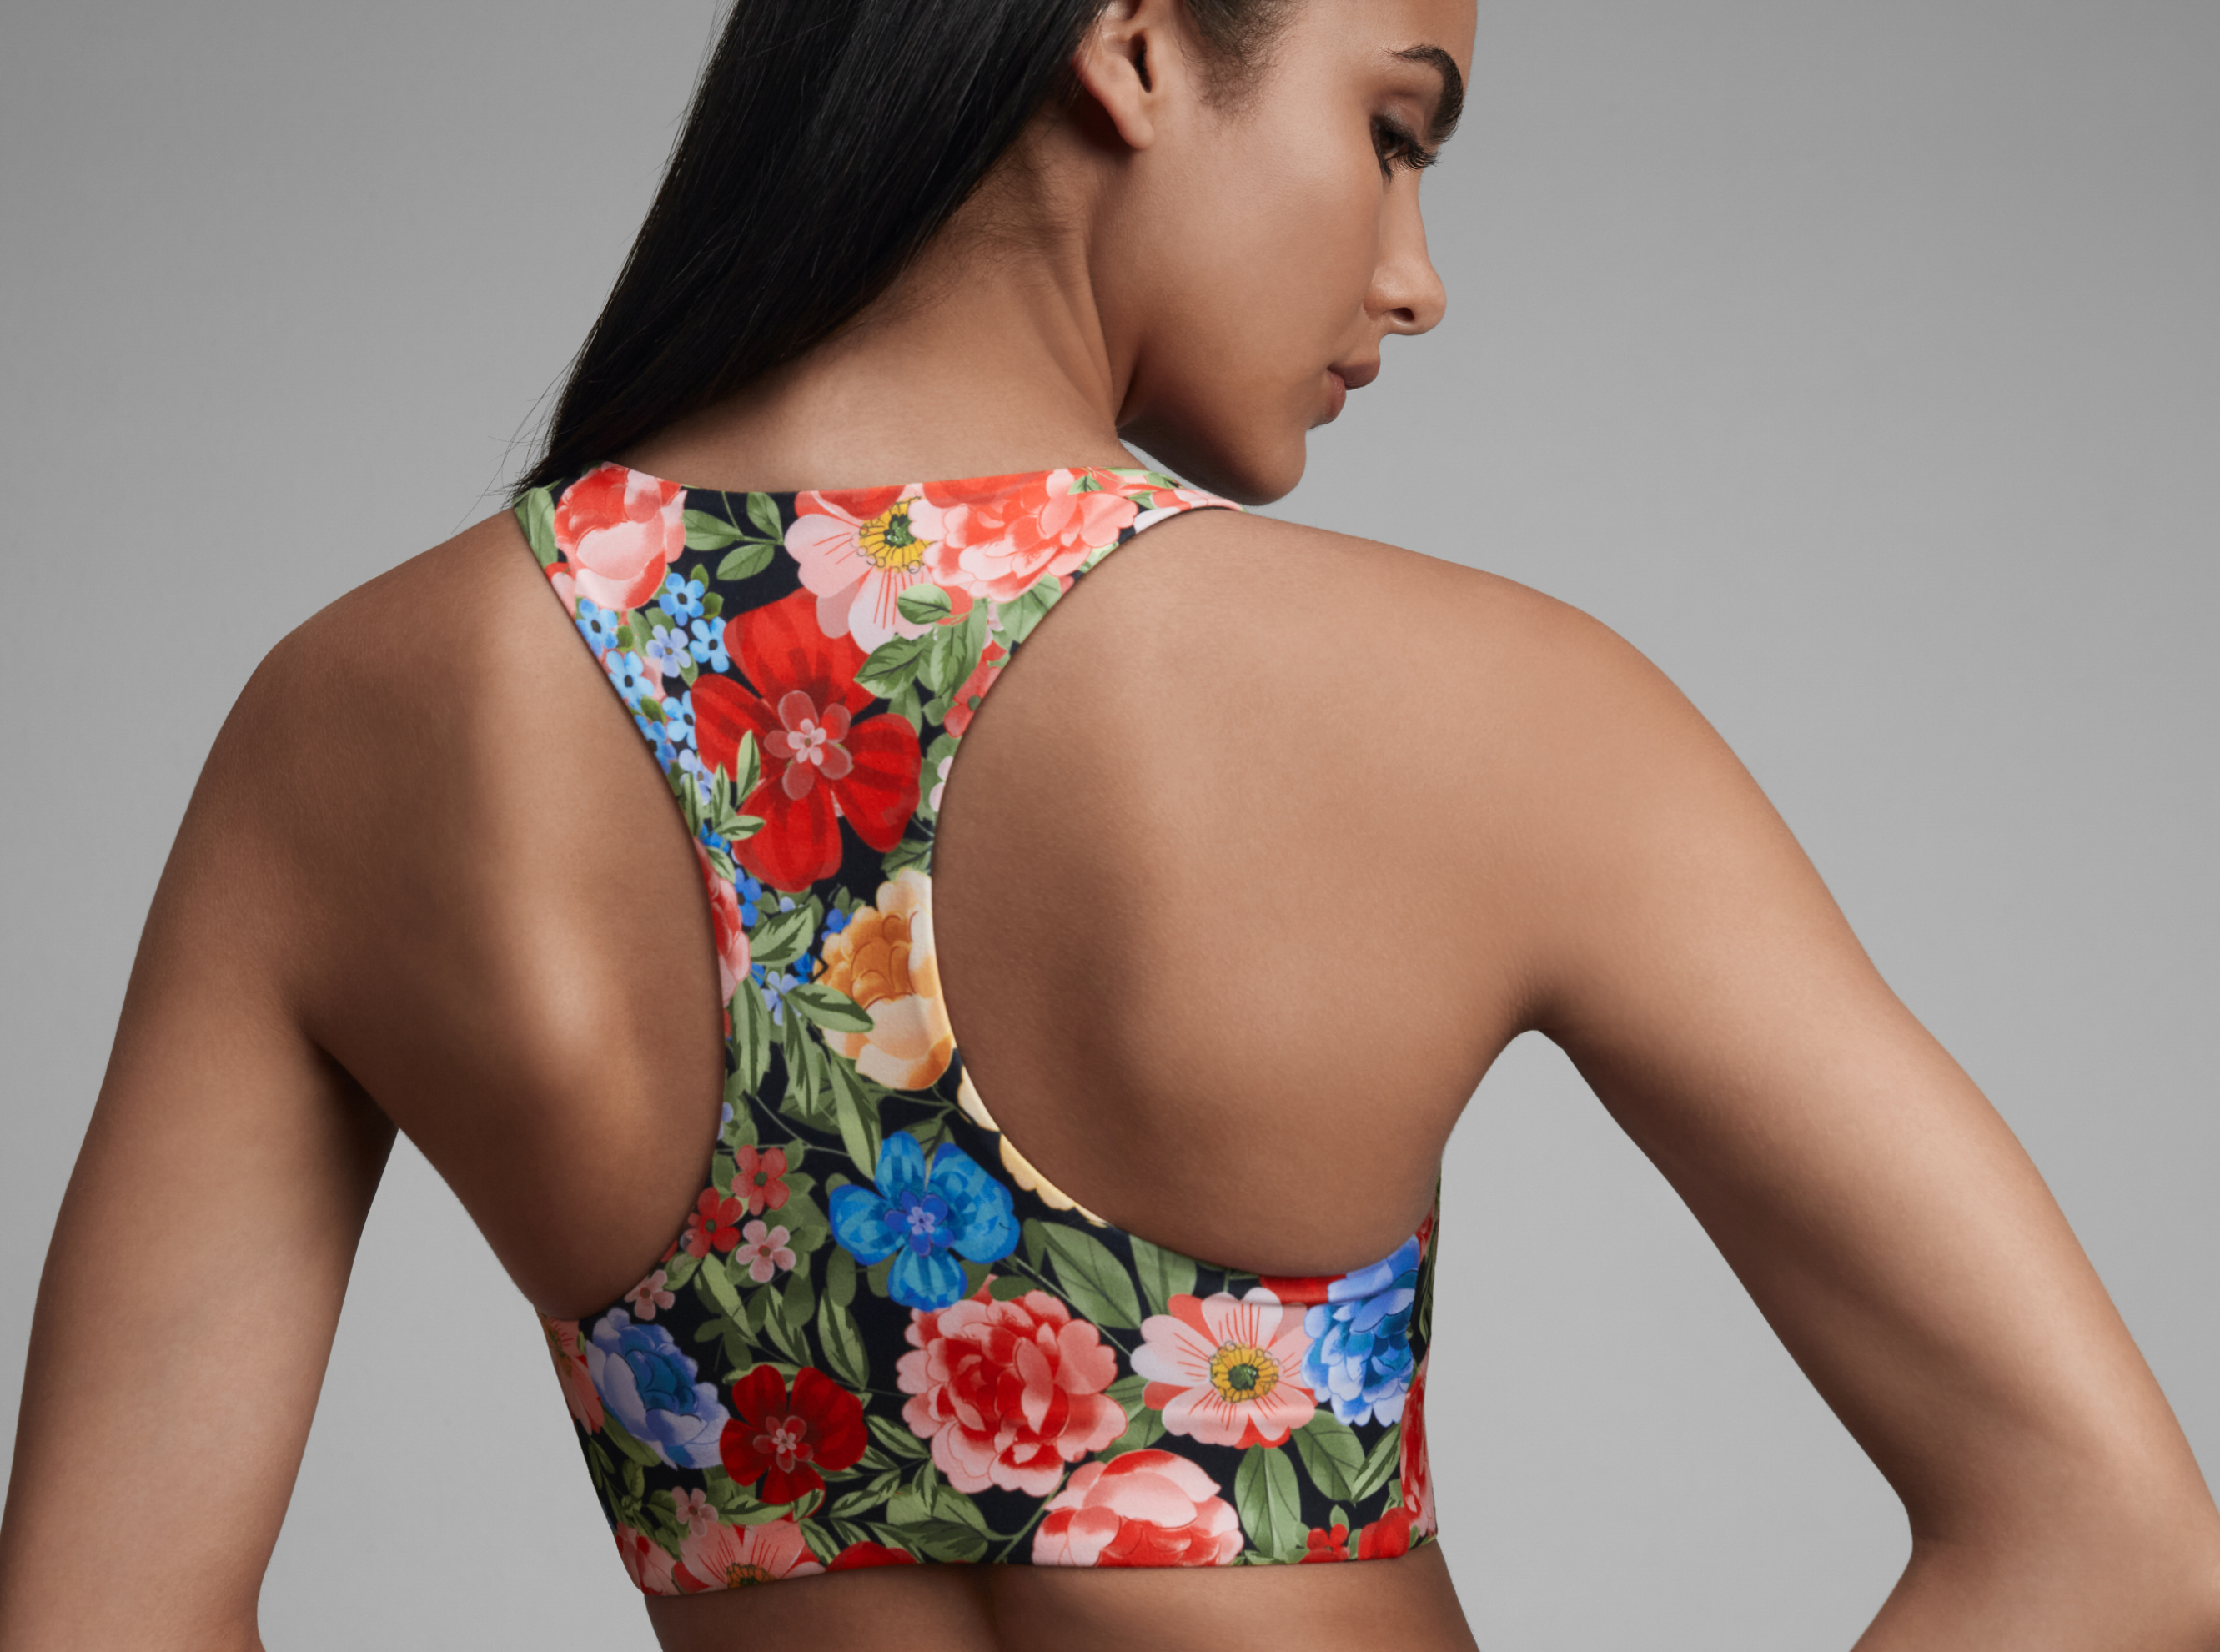 Woman in a floral sports bra